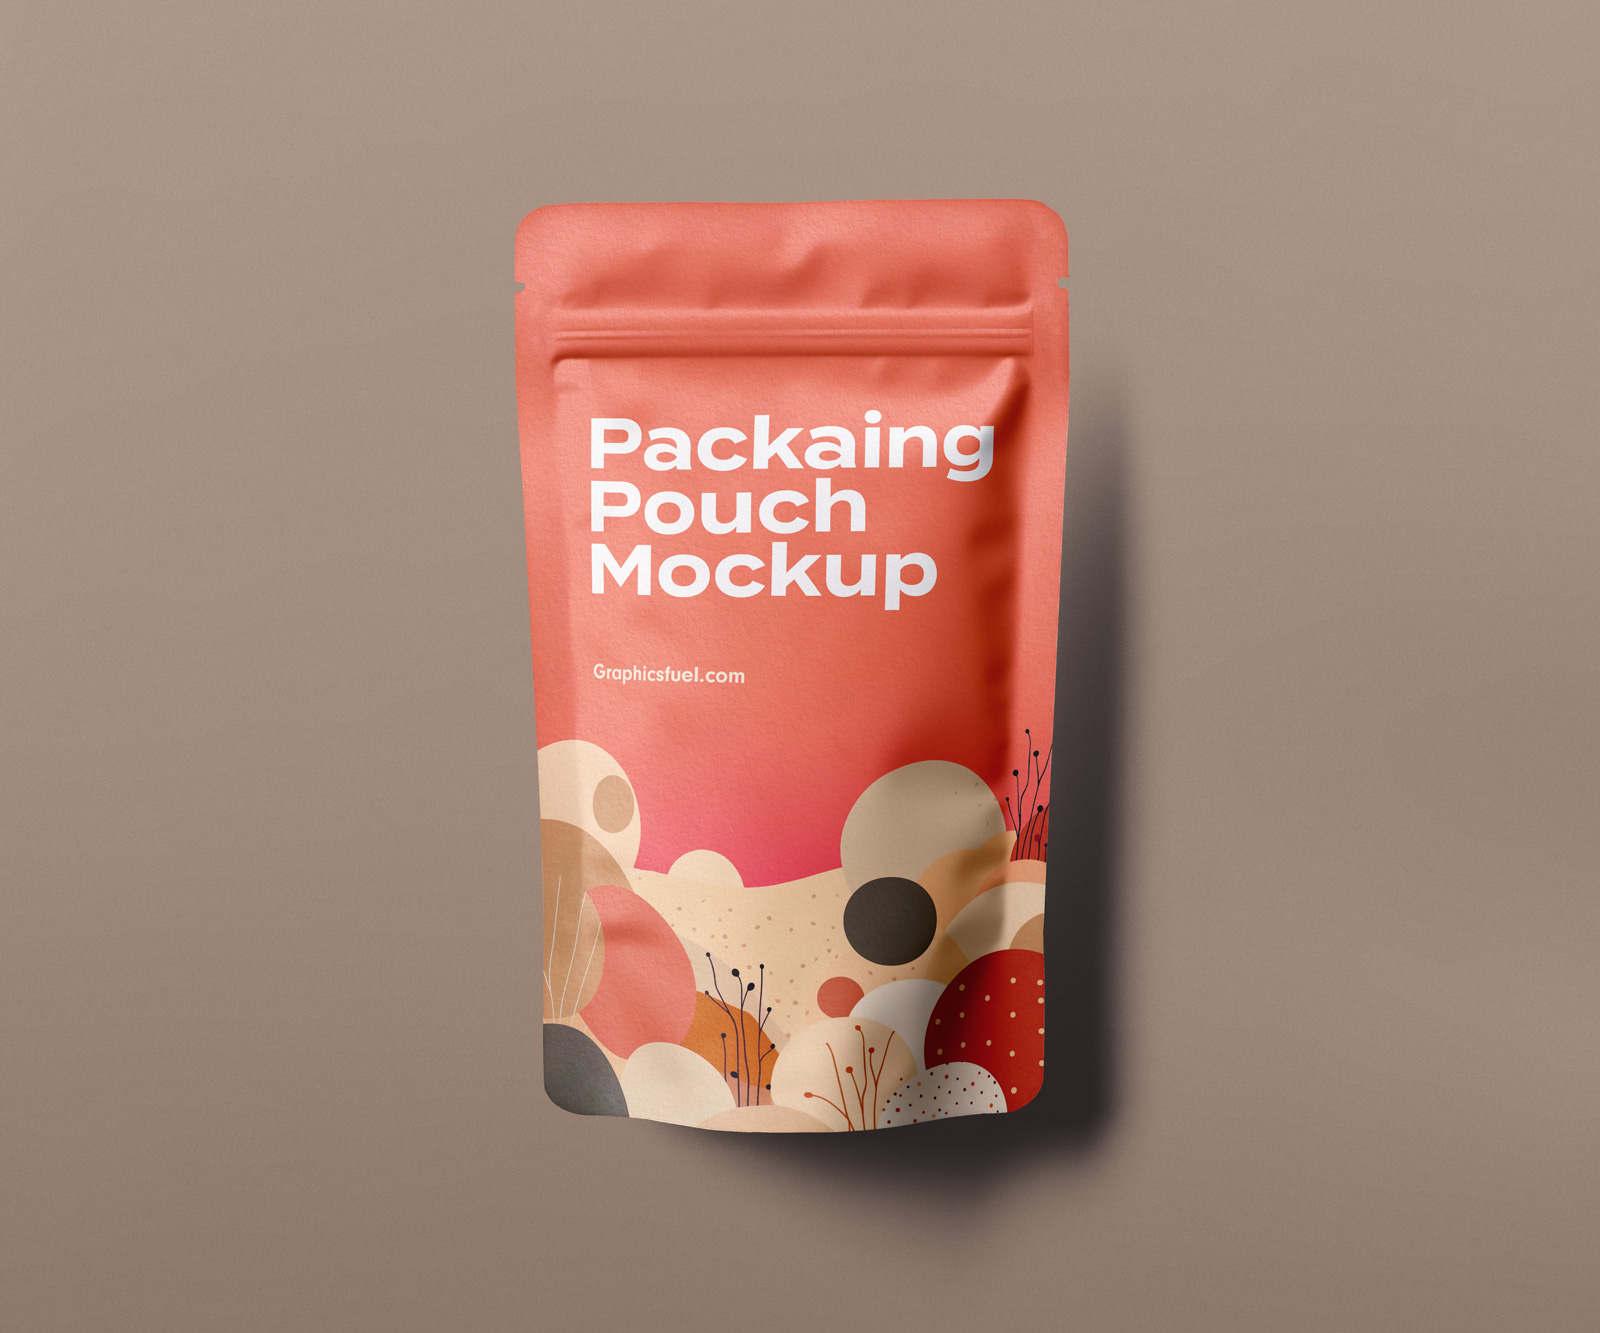 Packaging Pouch Mockup Template